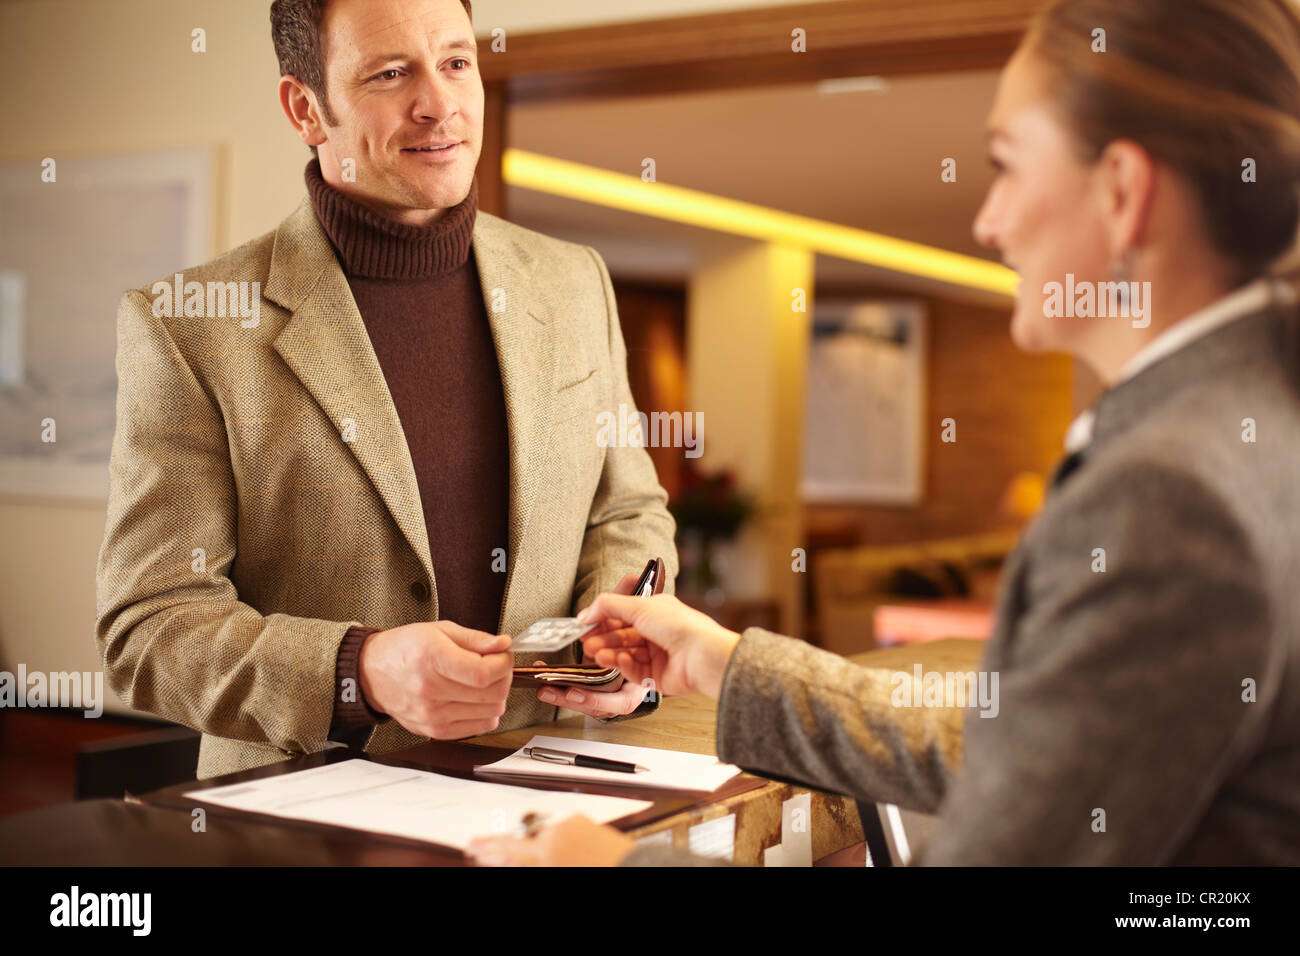 Man checking in to hotel Stock Photo